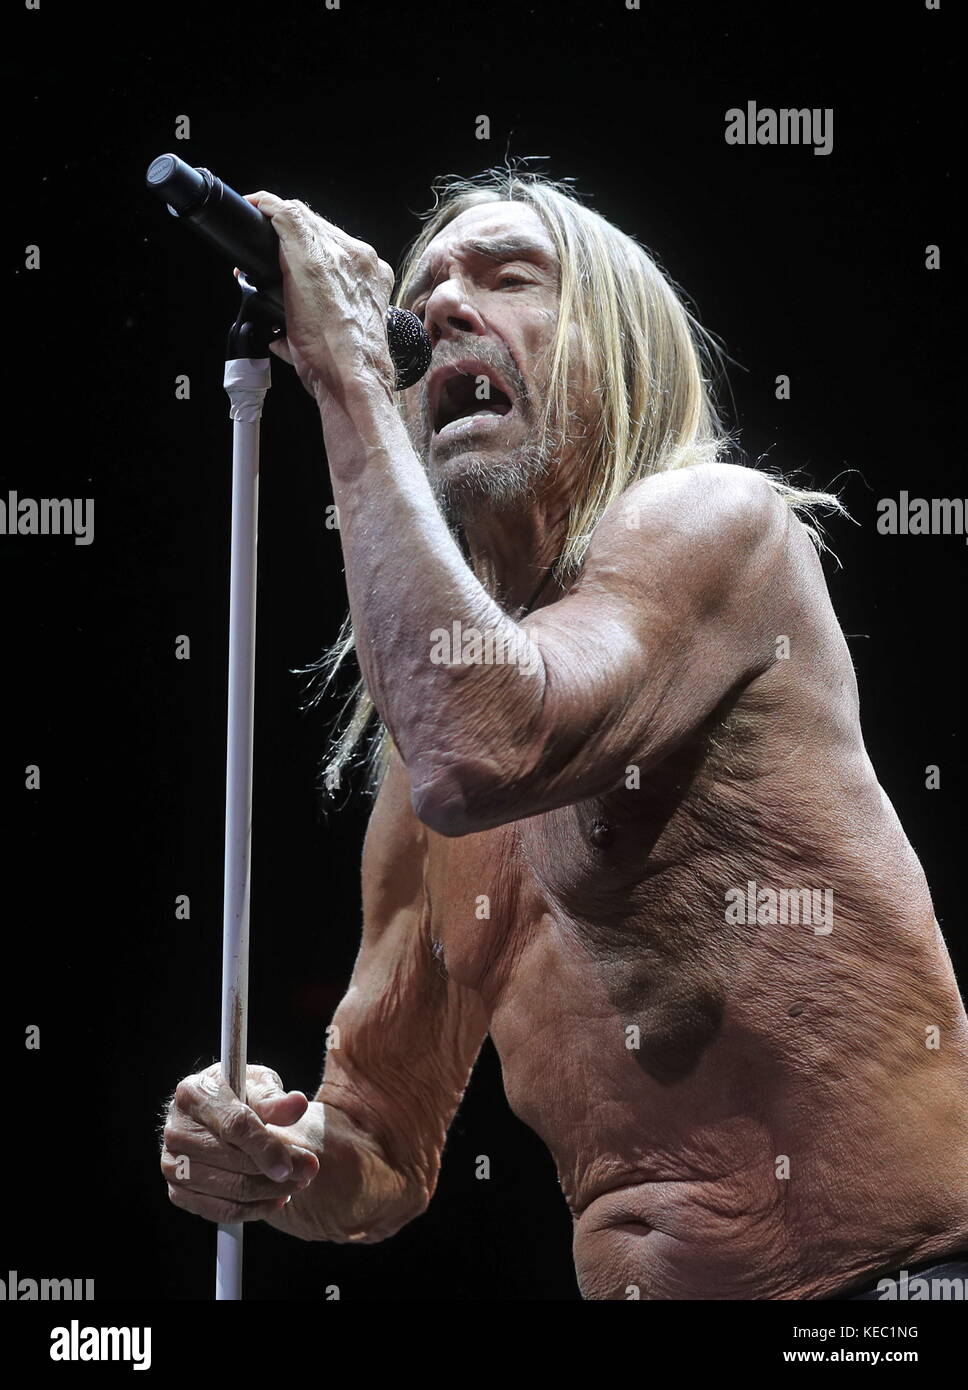 Moscow, Russia. 19th Oct, 2017. American punk rock musician Iggy Pop gives  a concert in Moscow's Stadium Live in support of his latest album titled  "Post Pop Depression". Credit: Artyom Korotayev/TASS/Alamy Live